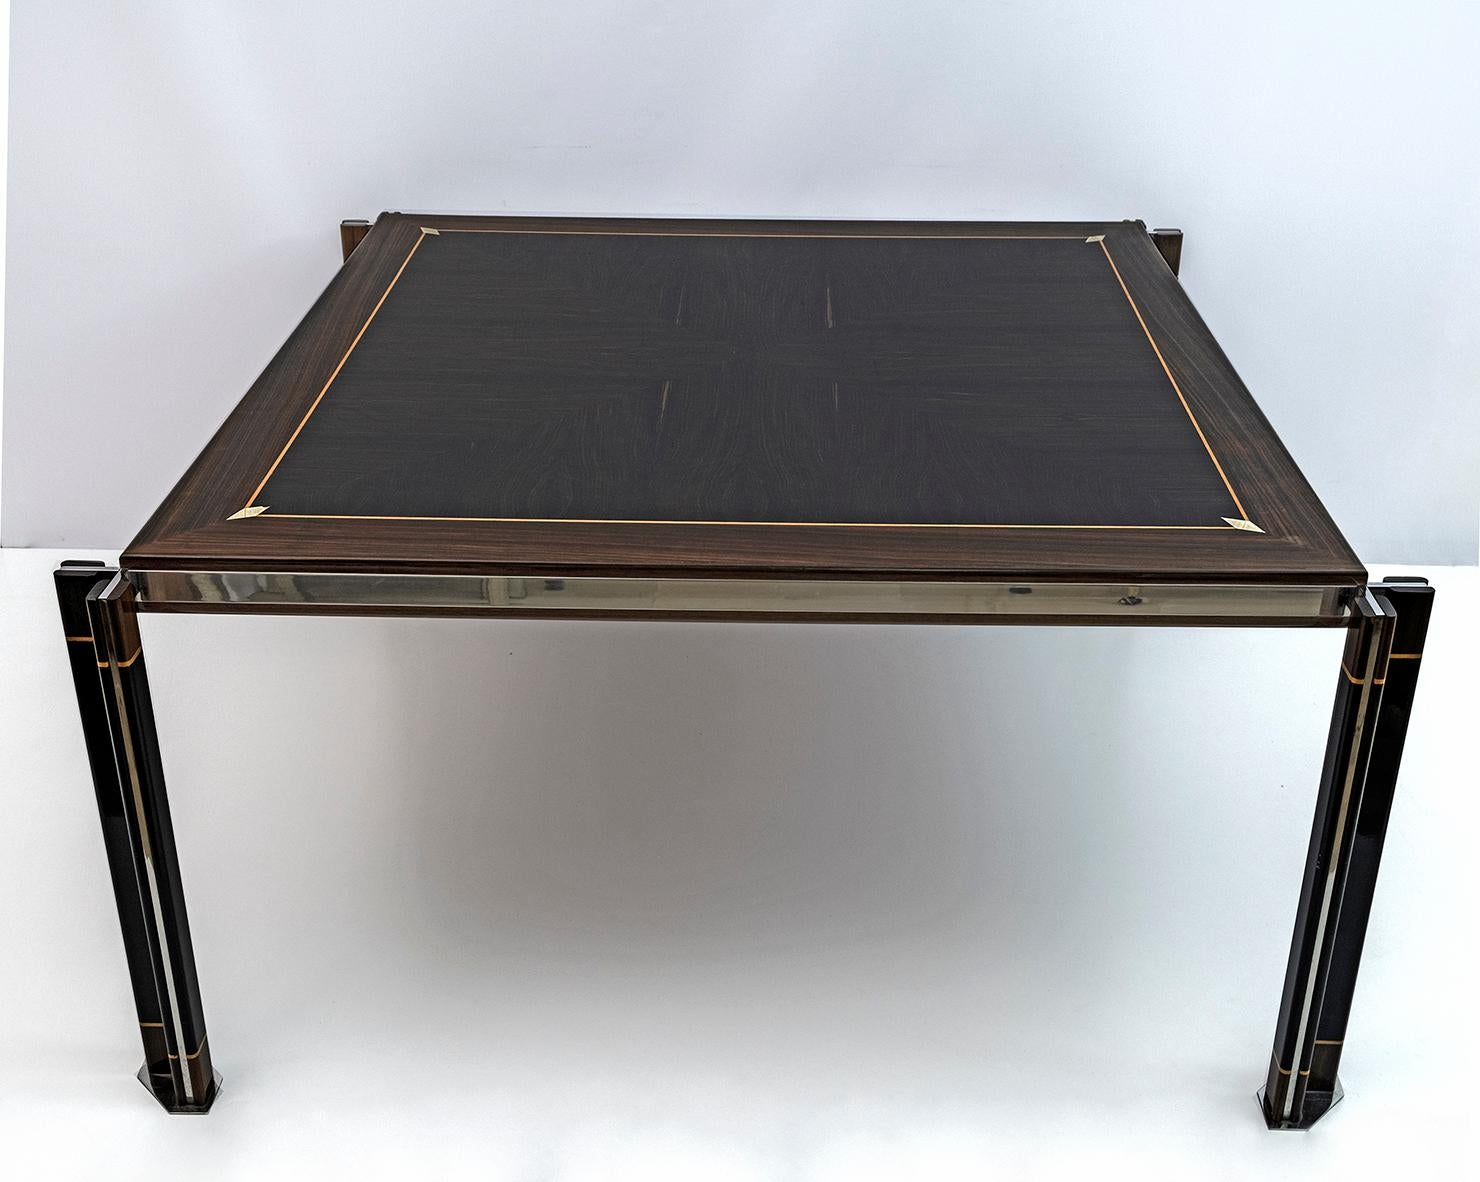 Late 20th Century Paolo Barracchia Italian Steel and Inlaid Wood Dinning Table by Roman Deco, 1978 For Sale